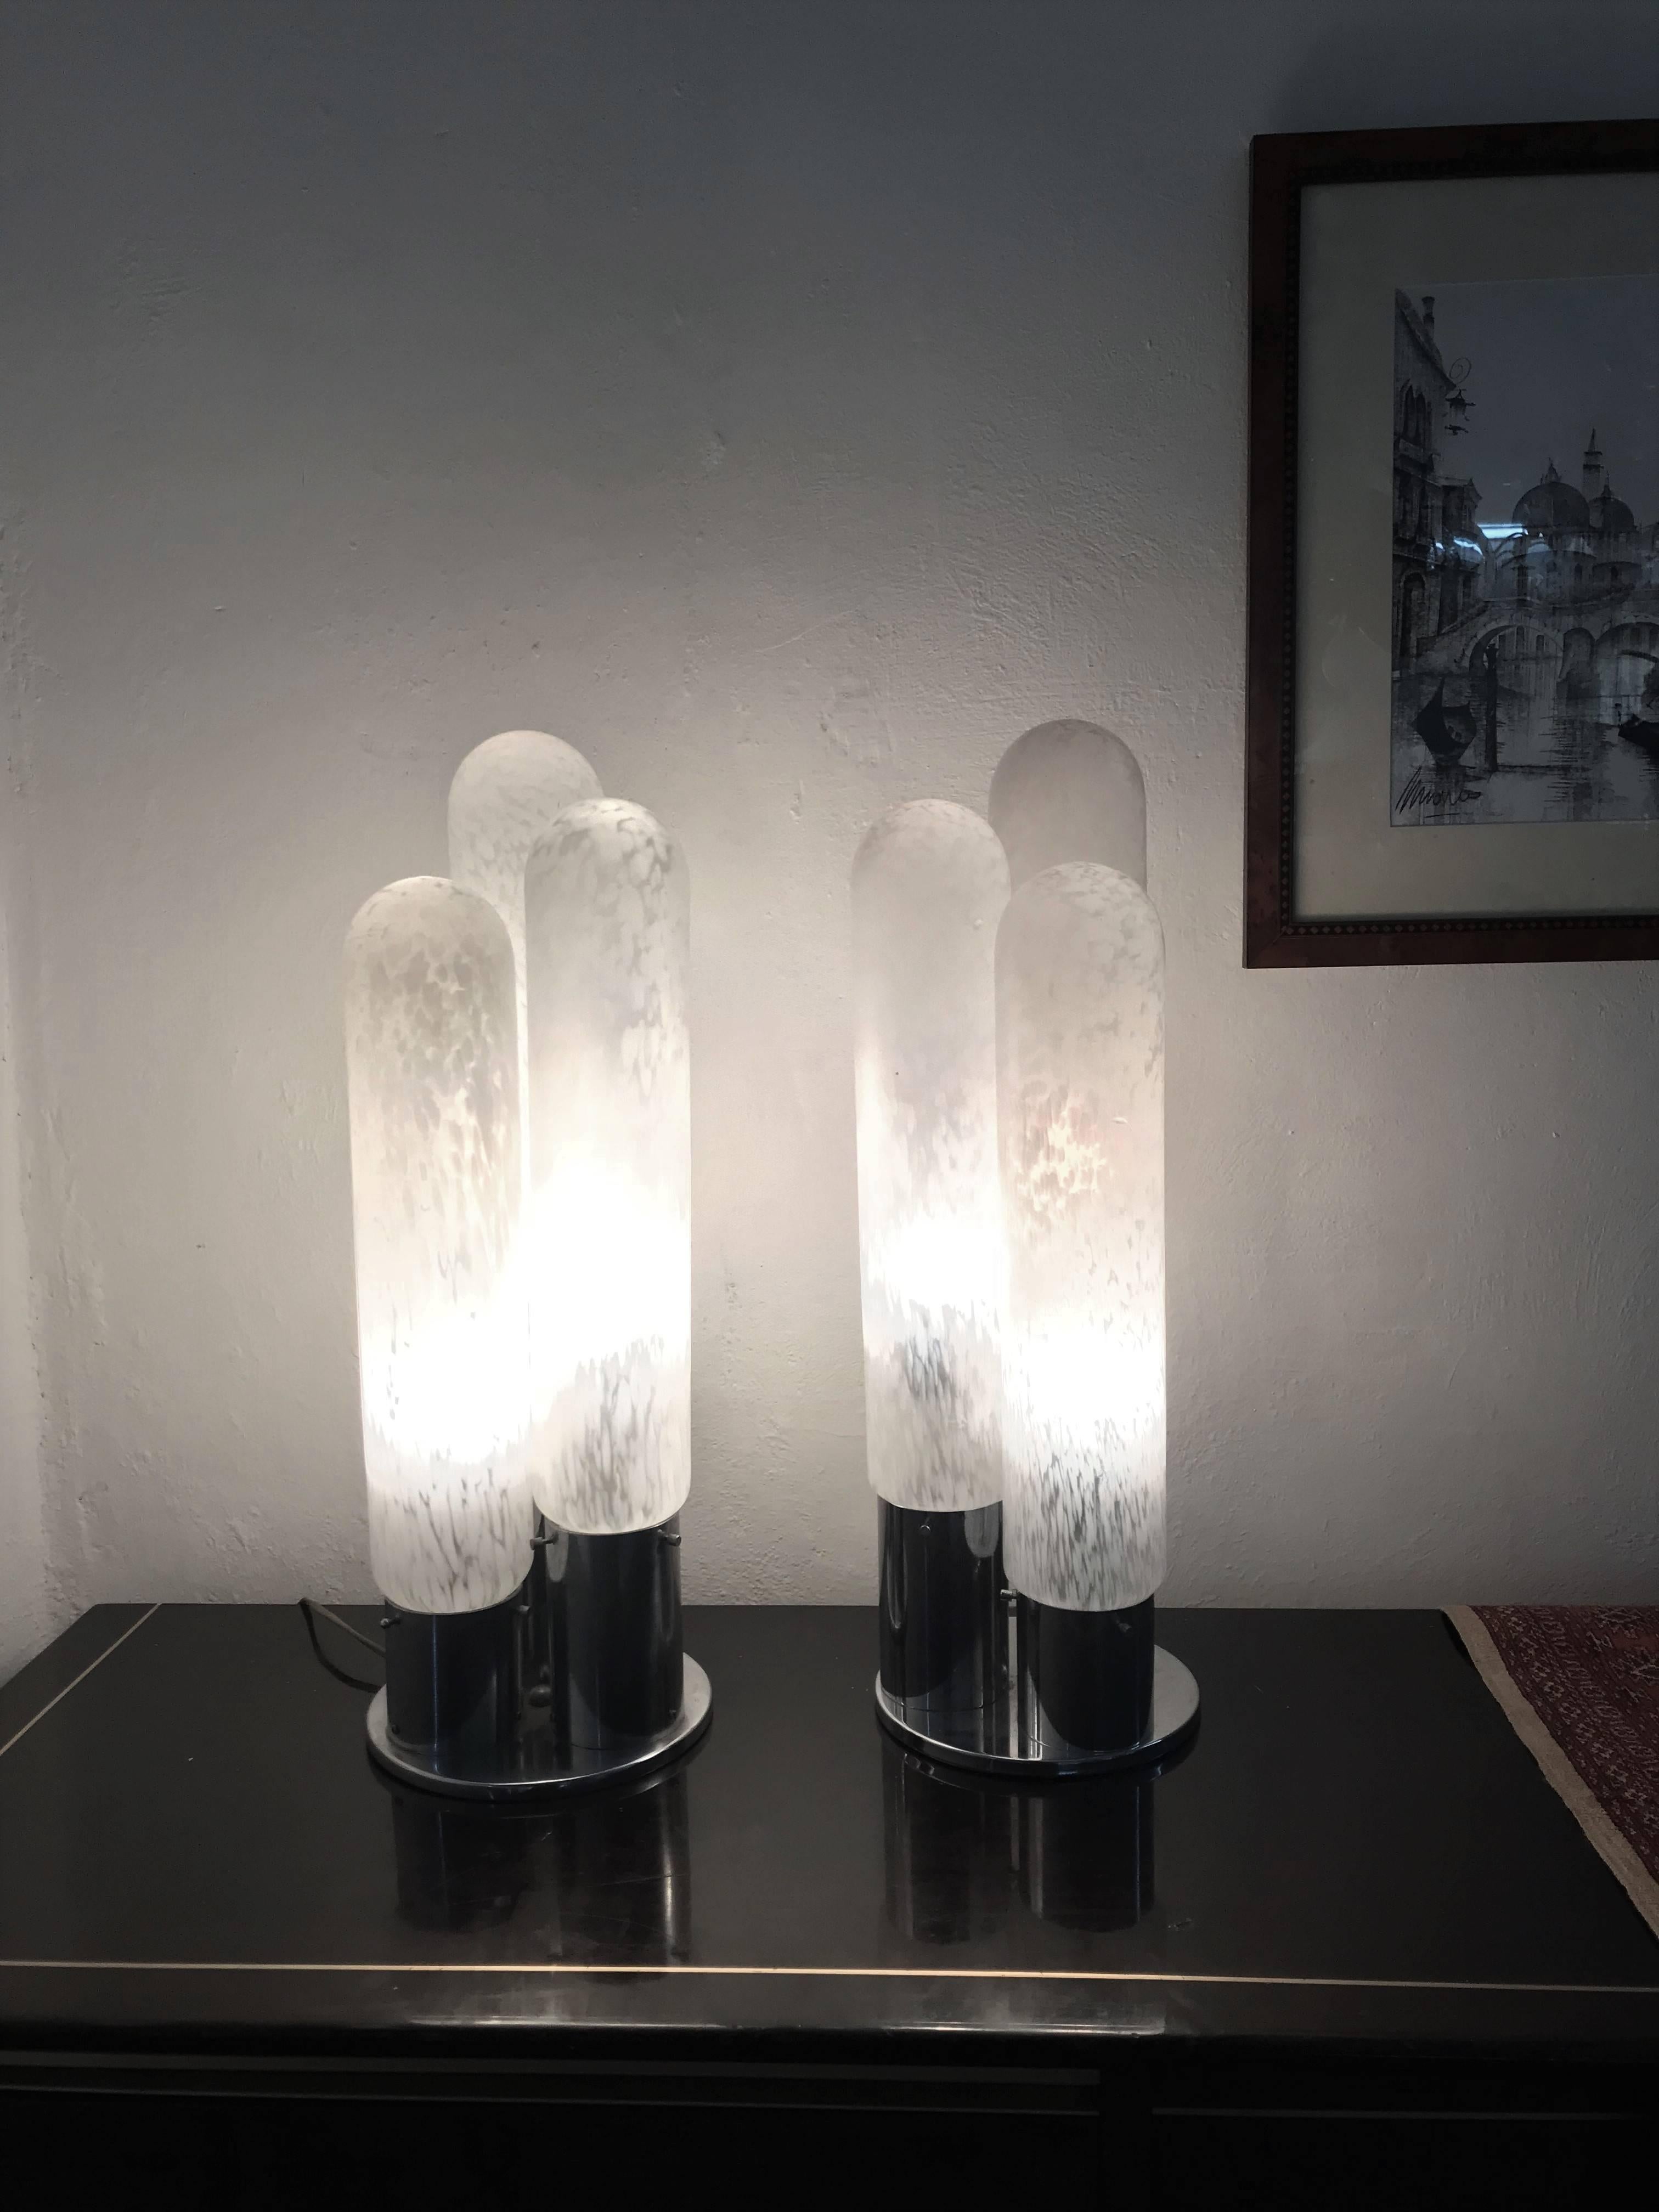 Mid-Century Modern pair of three light table lamps in steel and clear (frosted), speckled with white Murano blown glass designed by Aldo Nason for Mazzega, circa 1970.